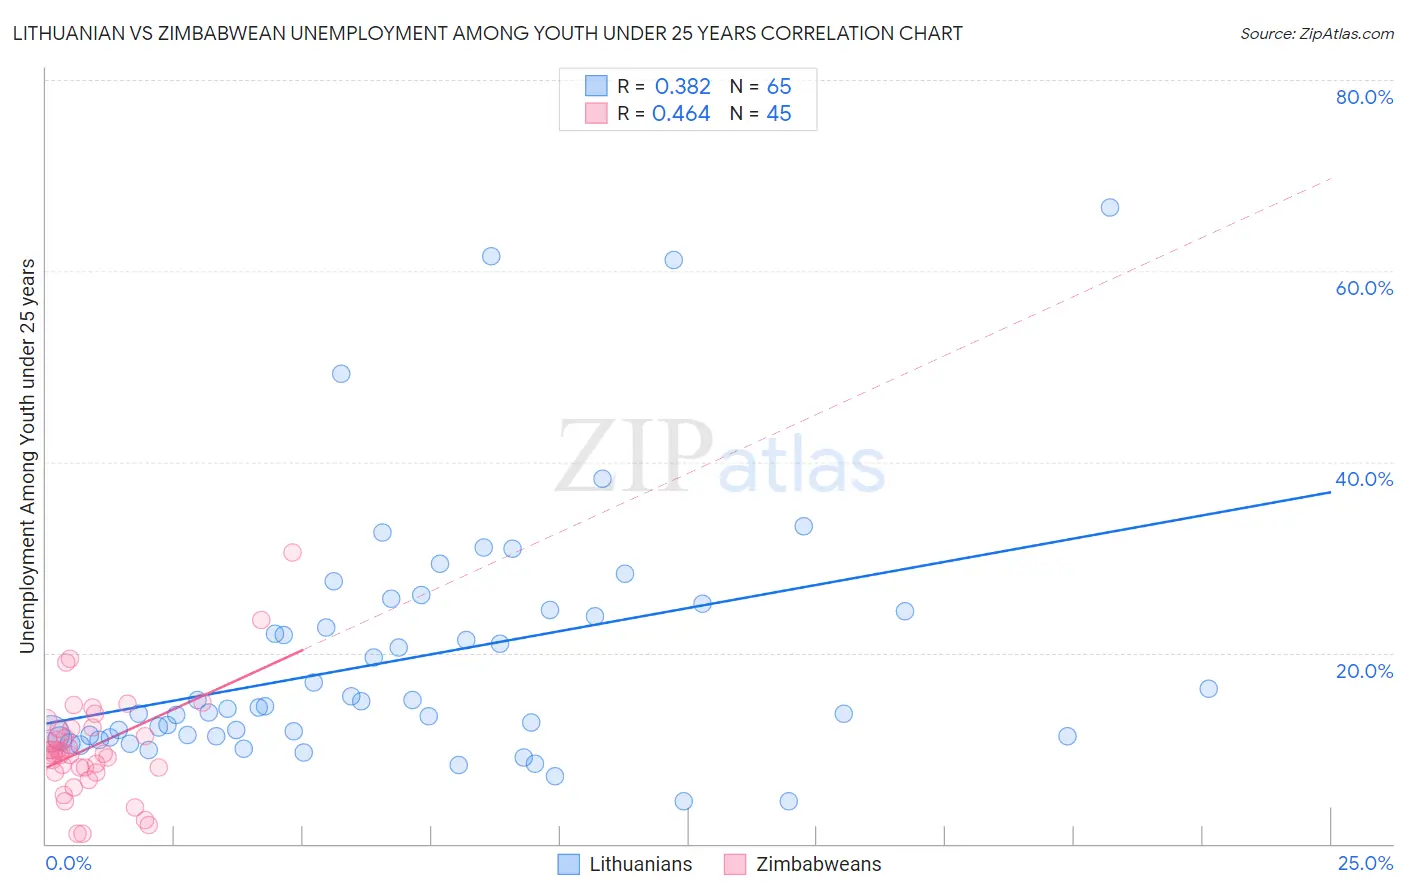 Lithuanian vs Zimbabwean Unemployment Among Youth under 25 years